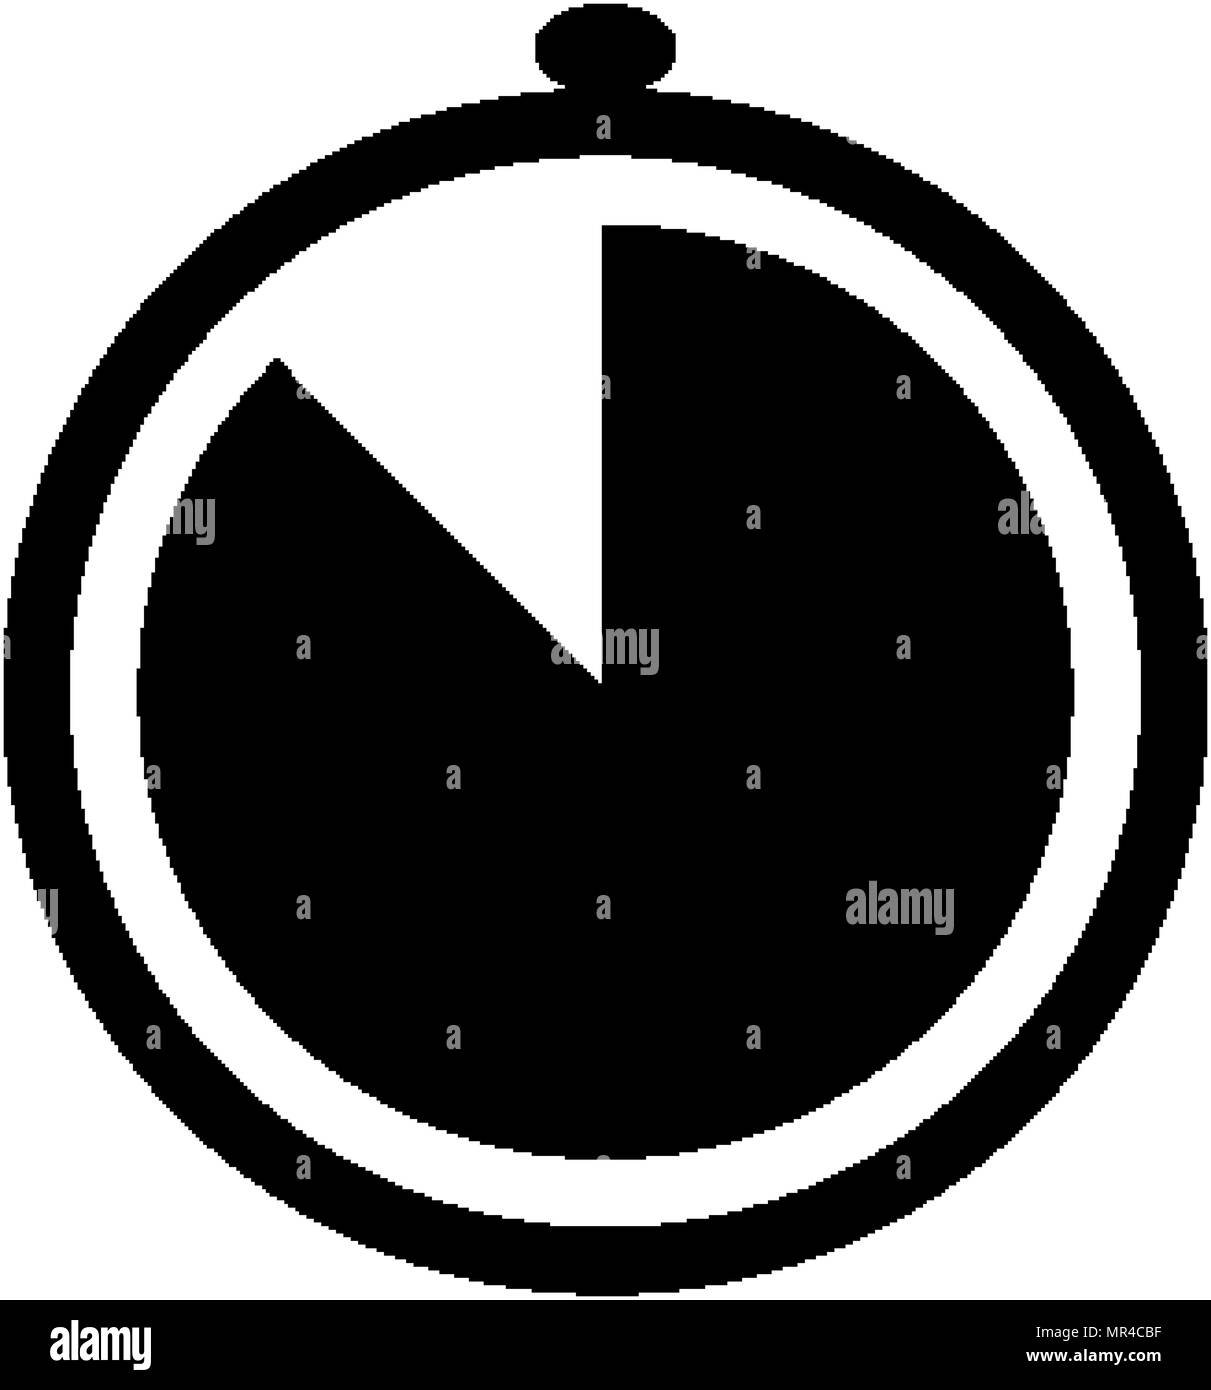 Simple stopwatch icon. Time clock symbol illustration Stock Vector